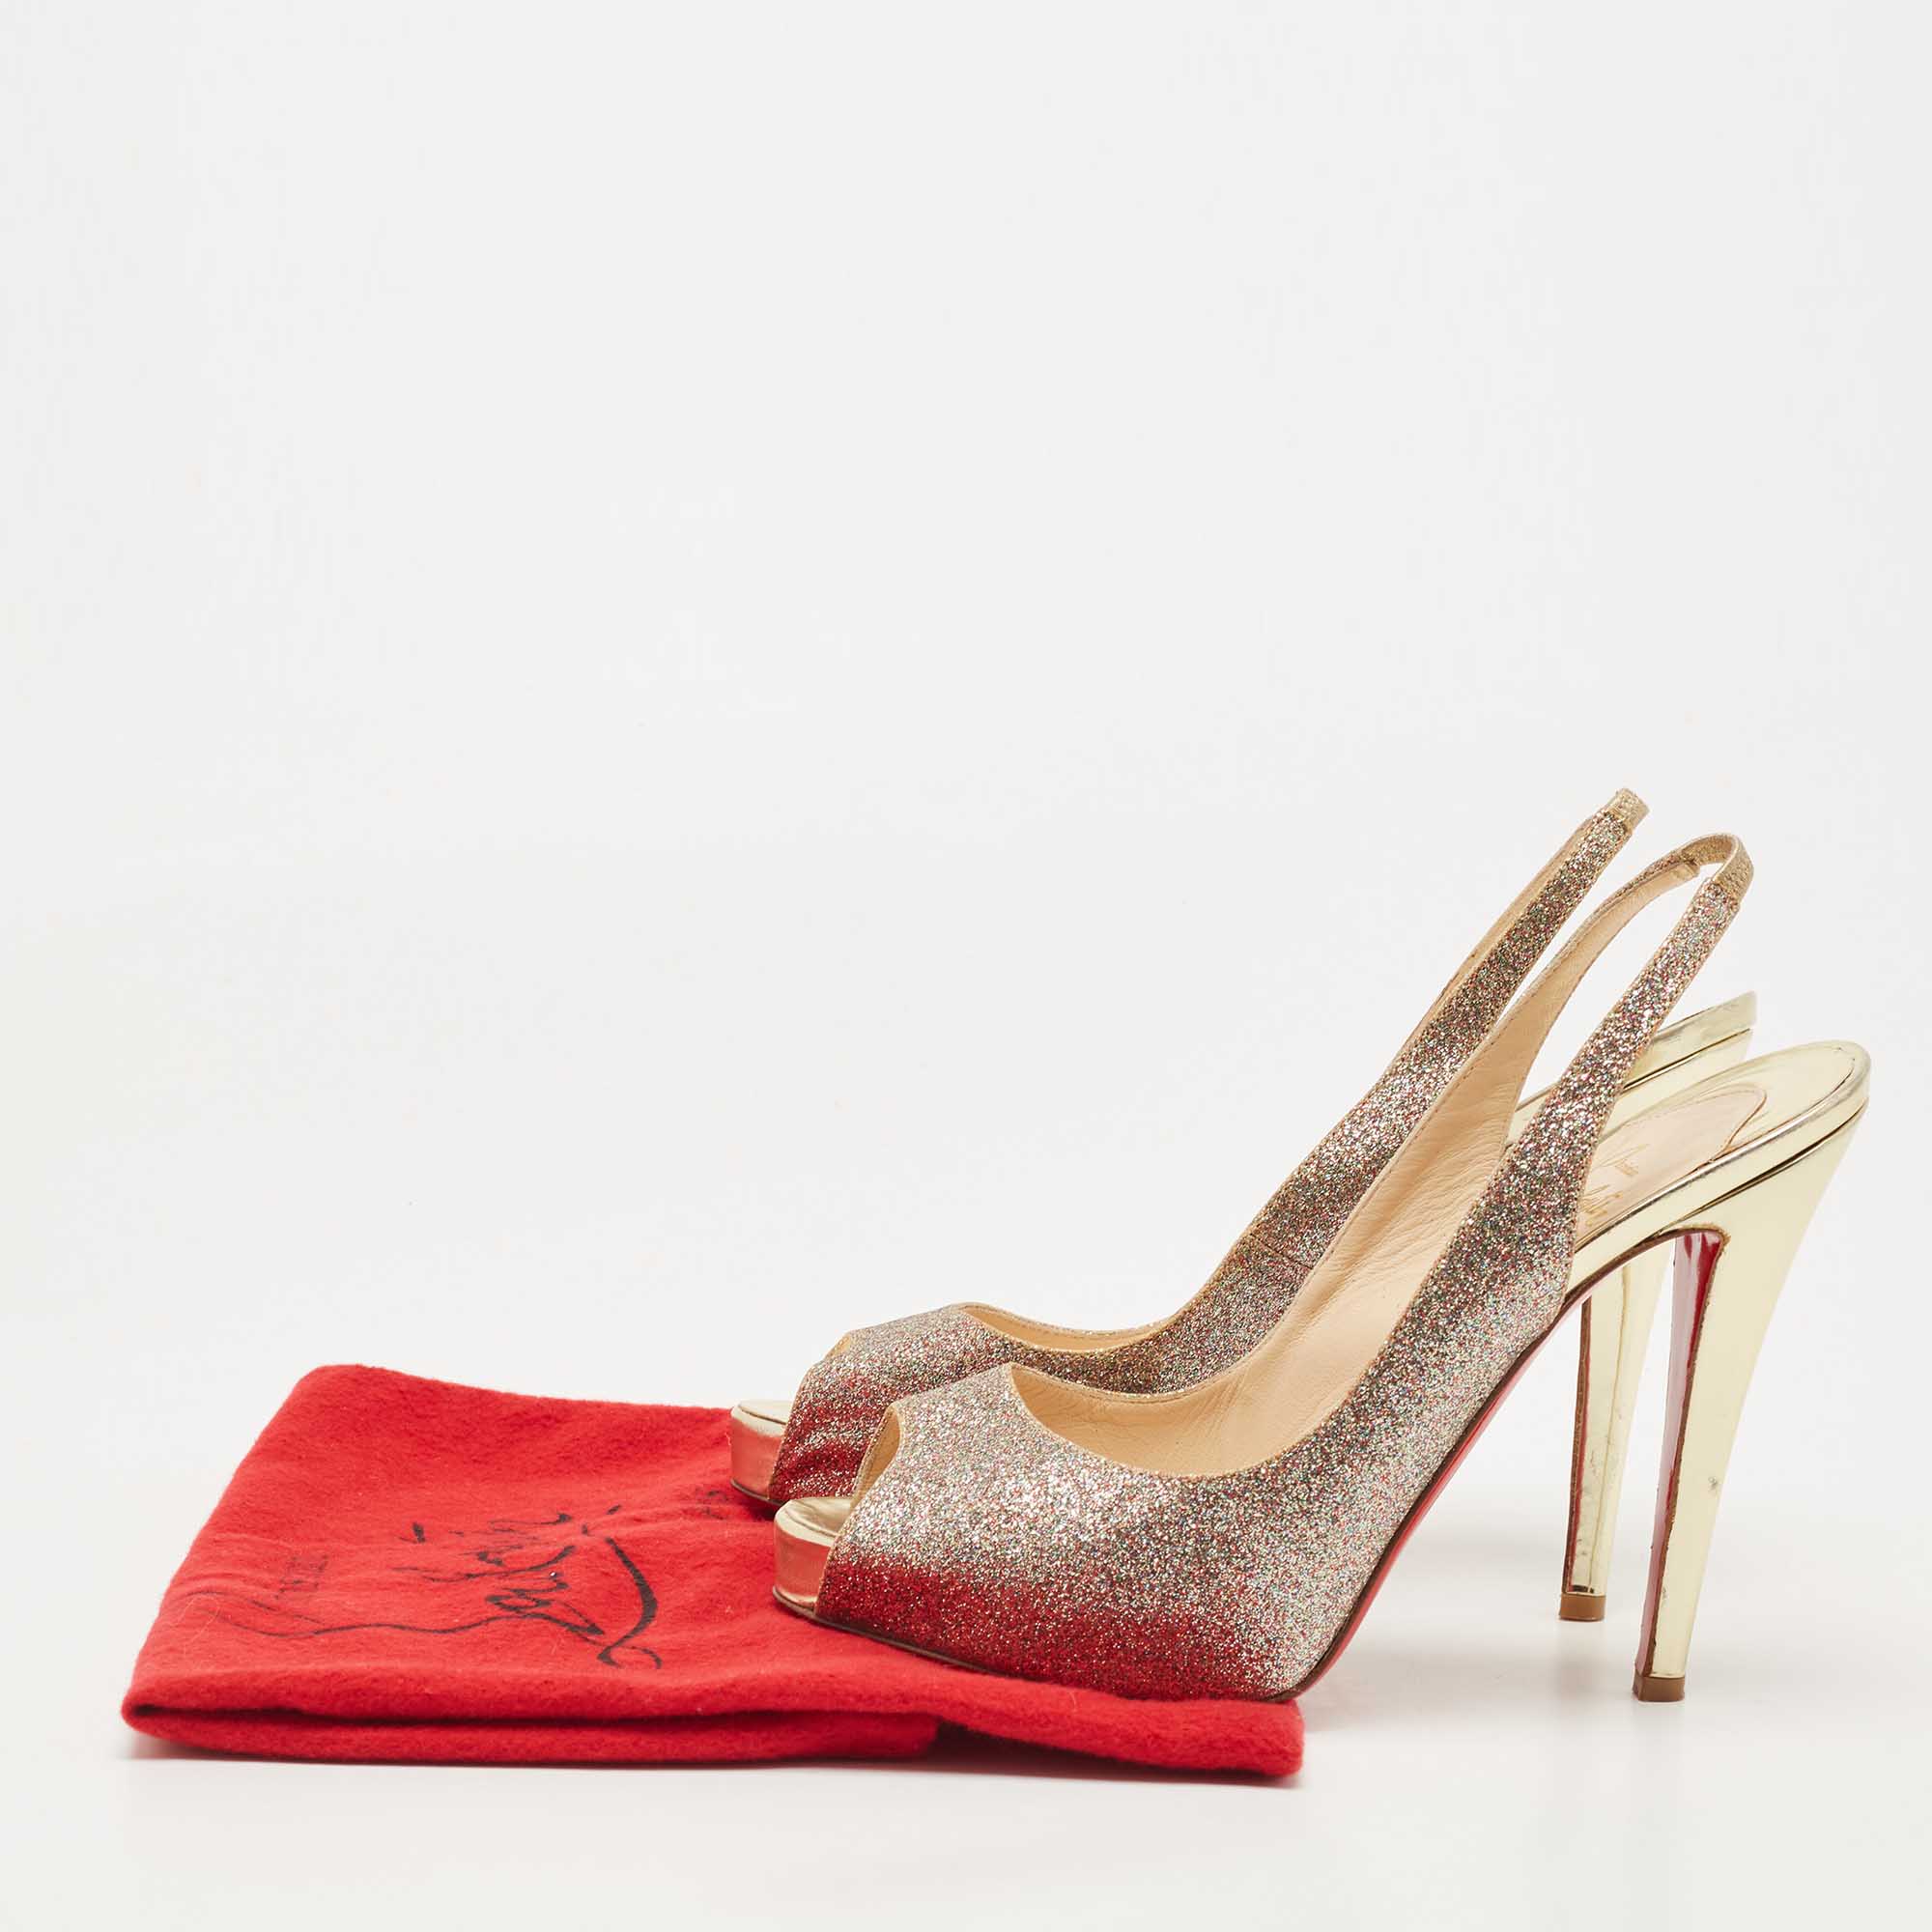 Christian Louboutin Metallic Gold Glitter Private Number Sandals Size 39